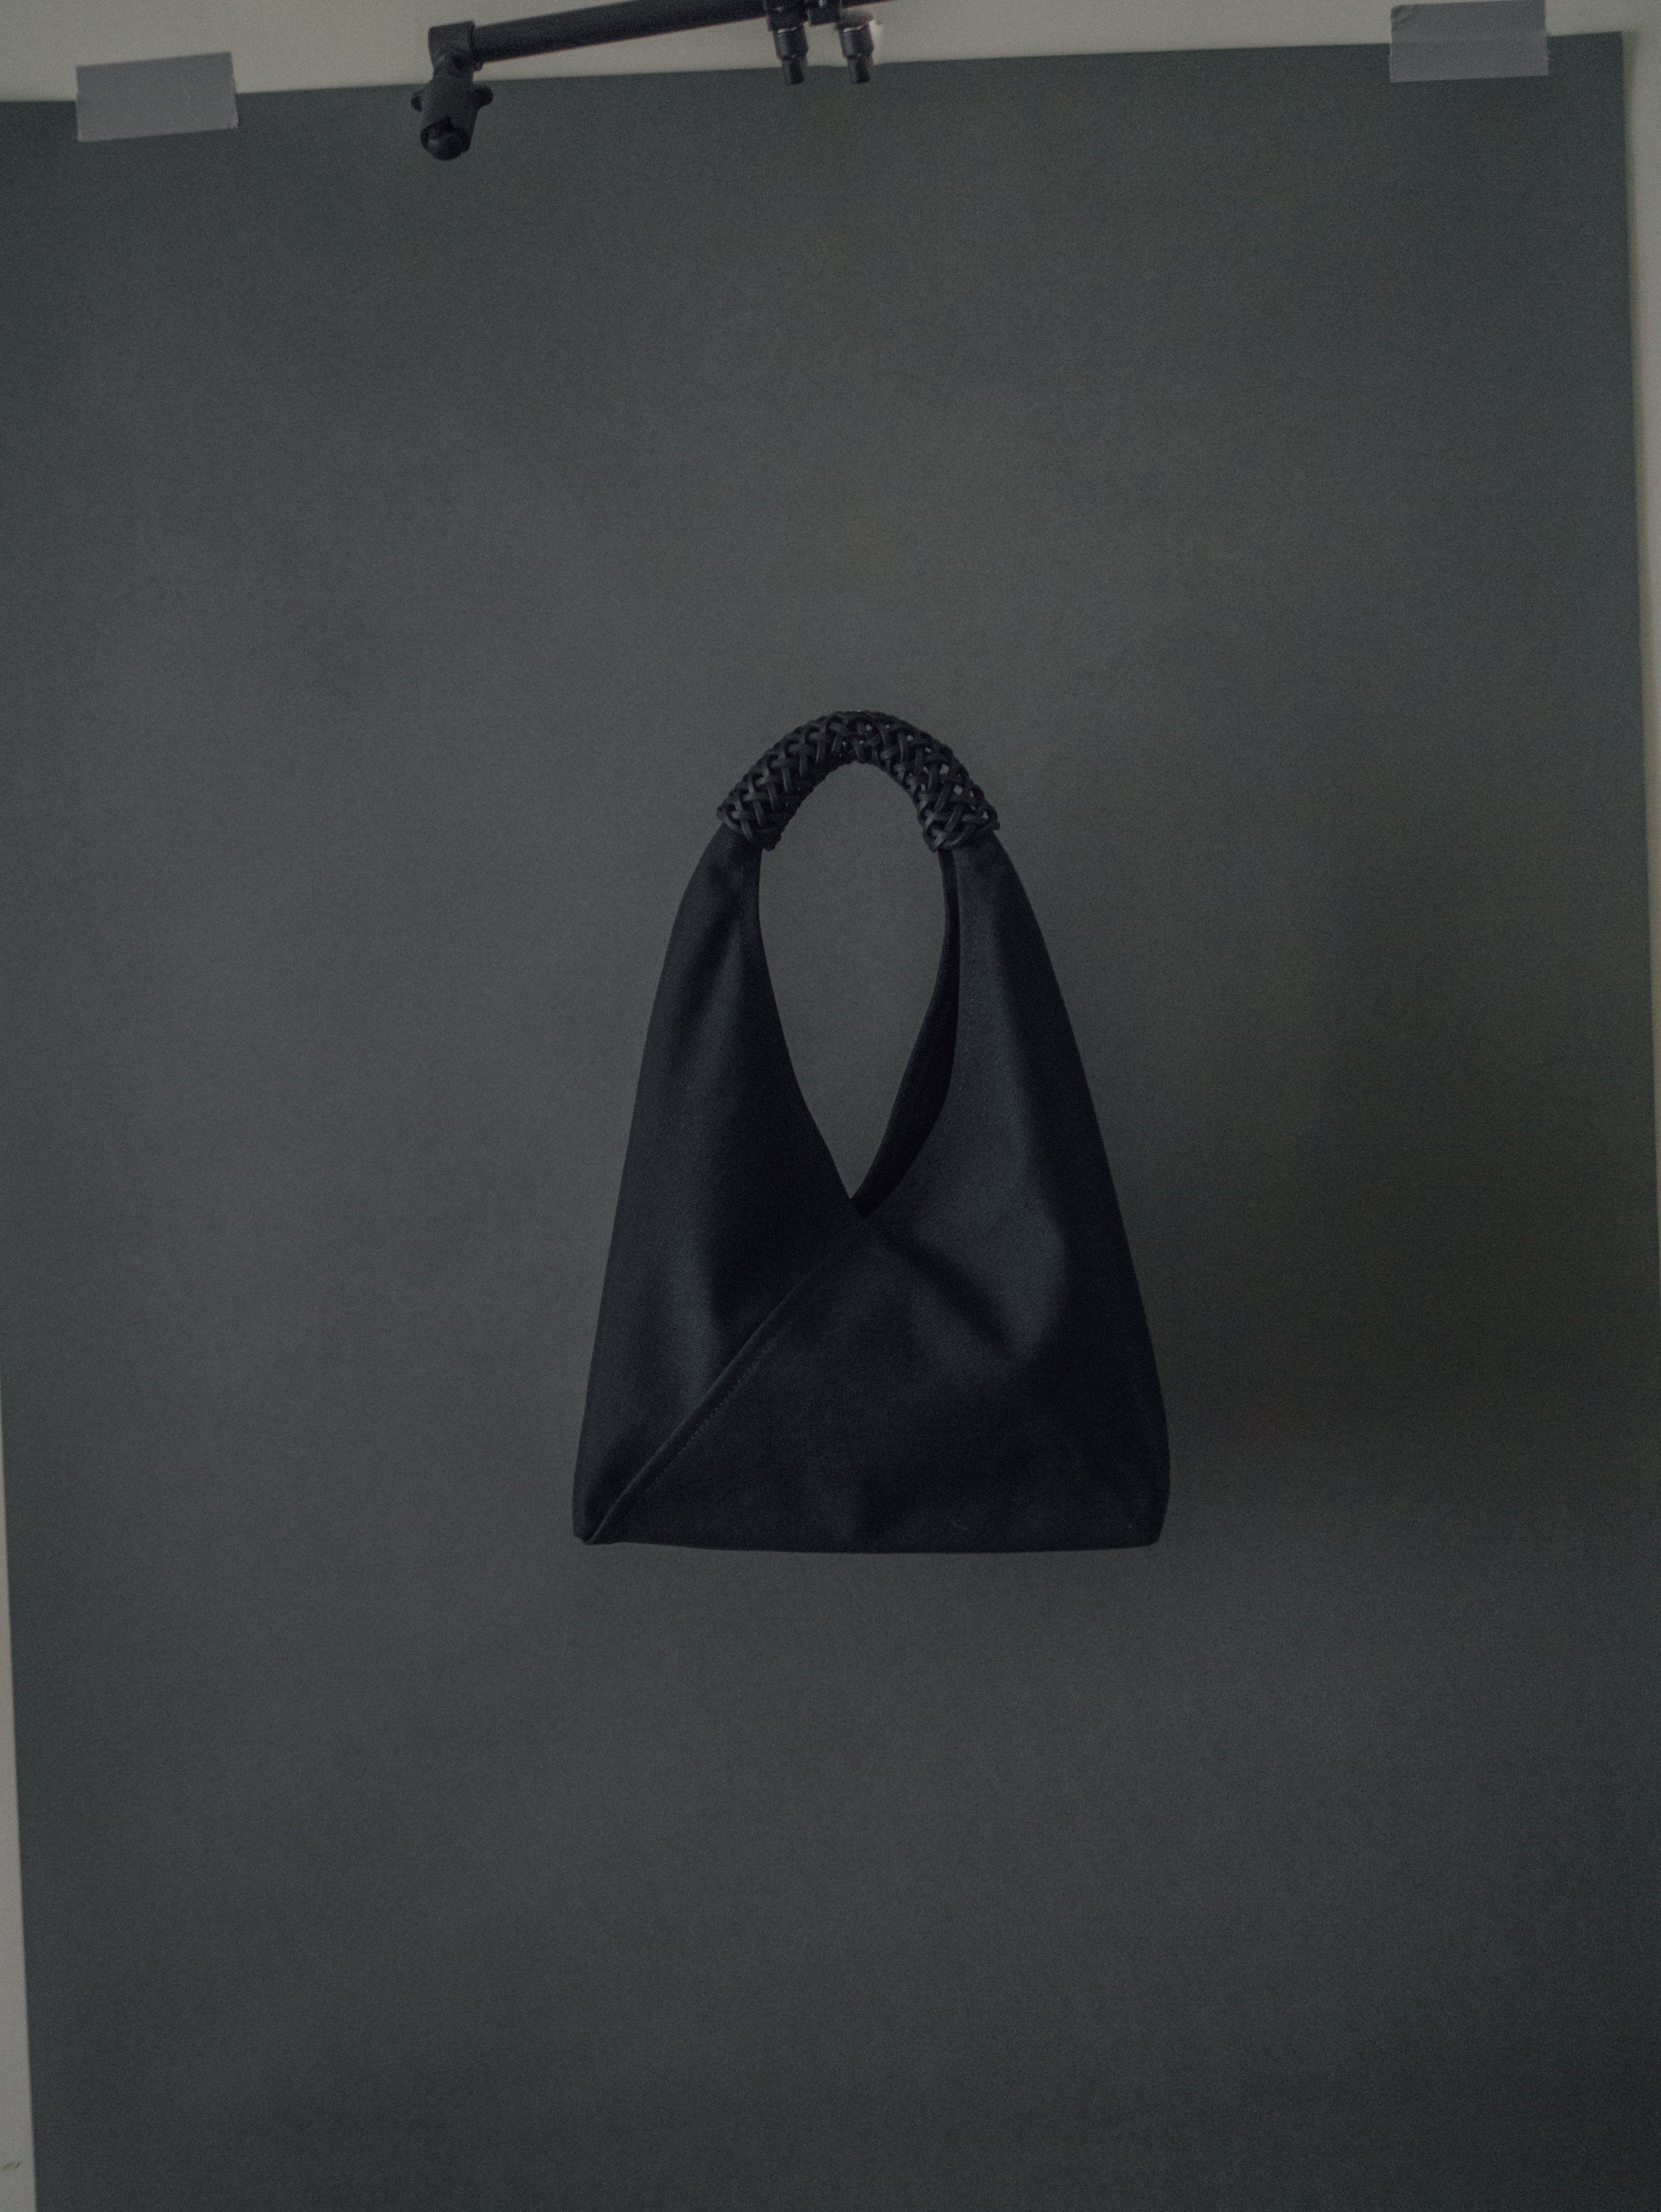 Woven Triangle Bag 36cm in All-Black